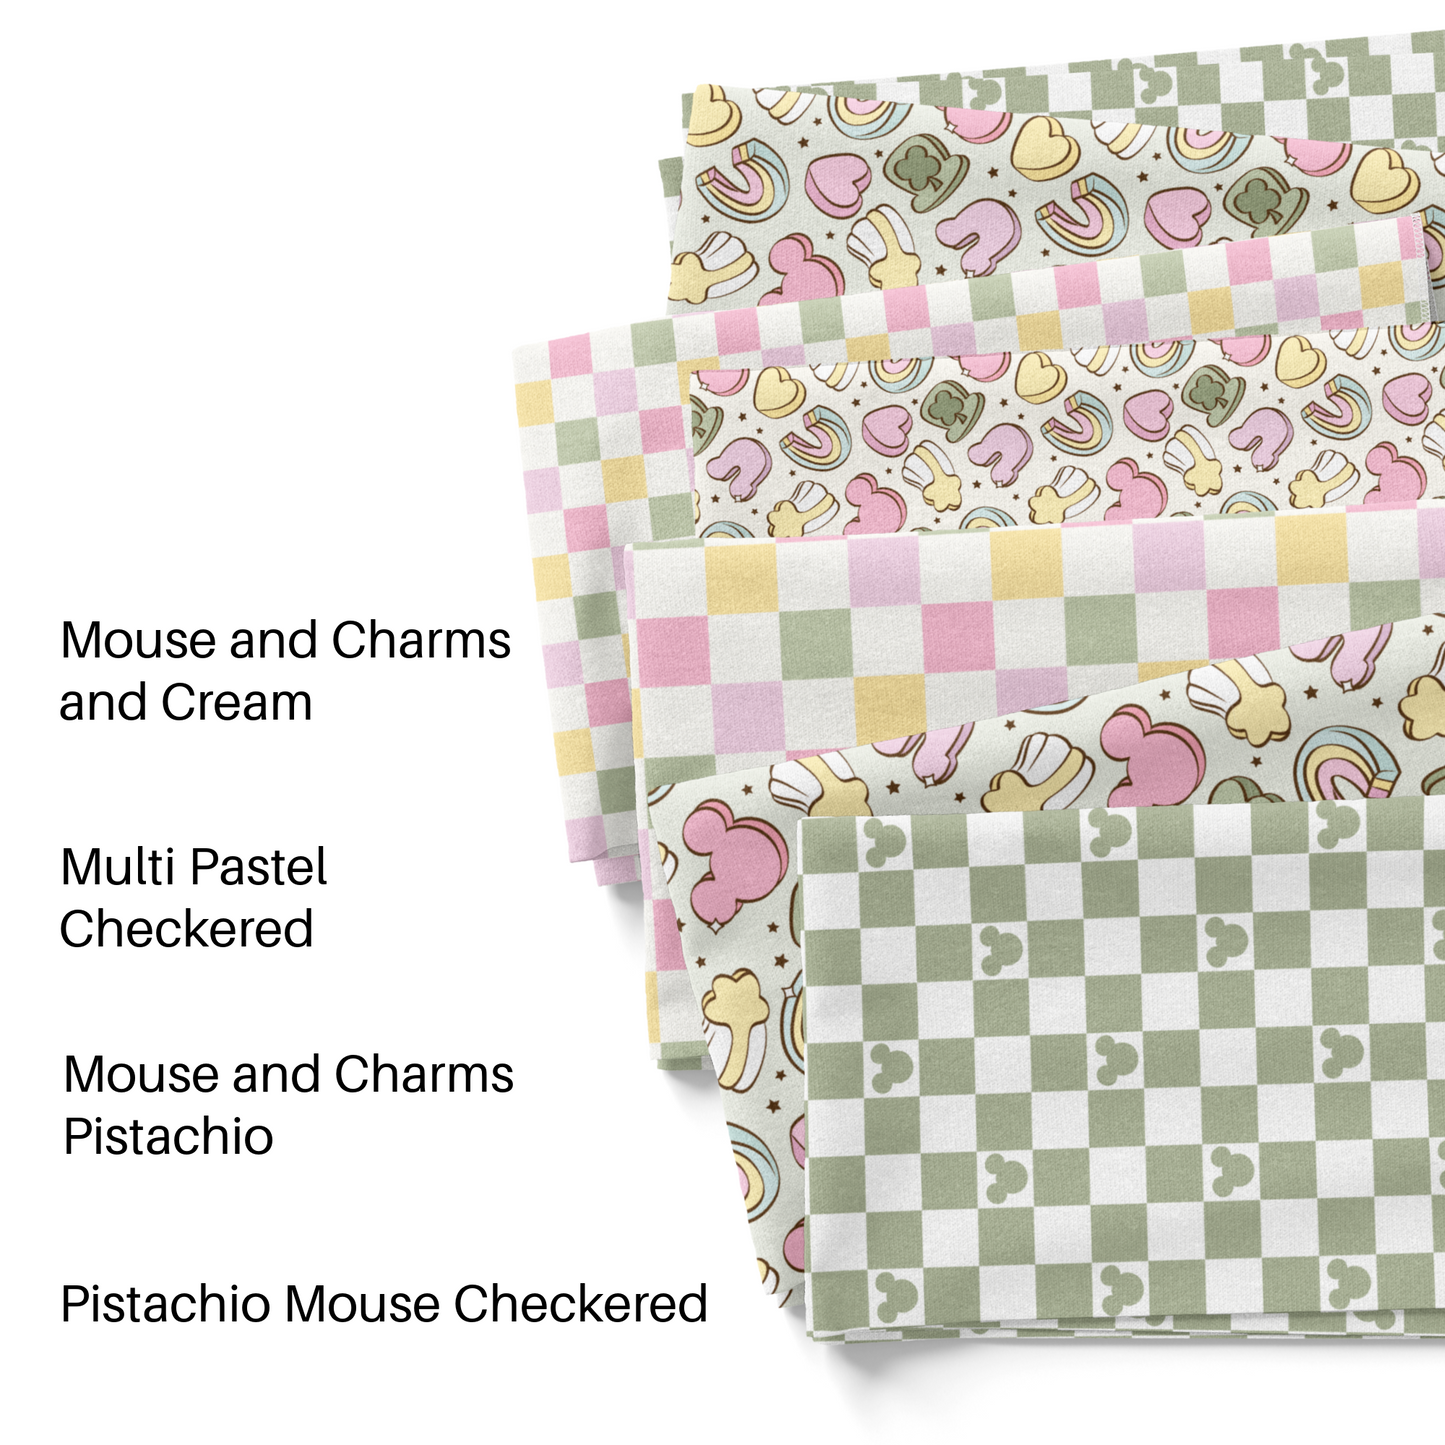 My Darling Creates Pastel St. Patrick's Day Mouse themed fabric by the yard.